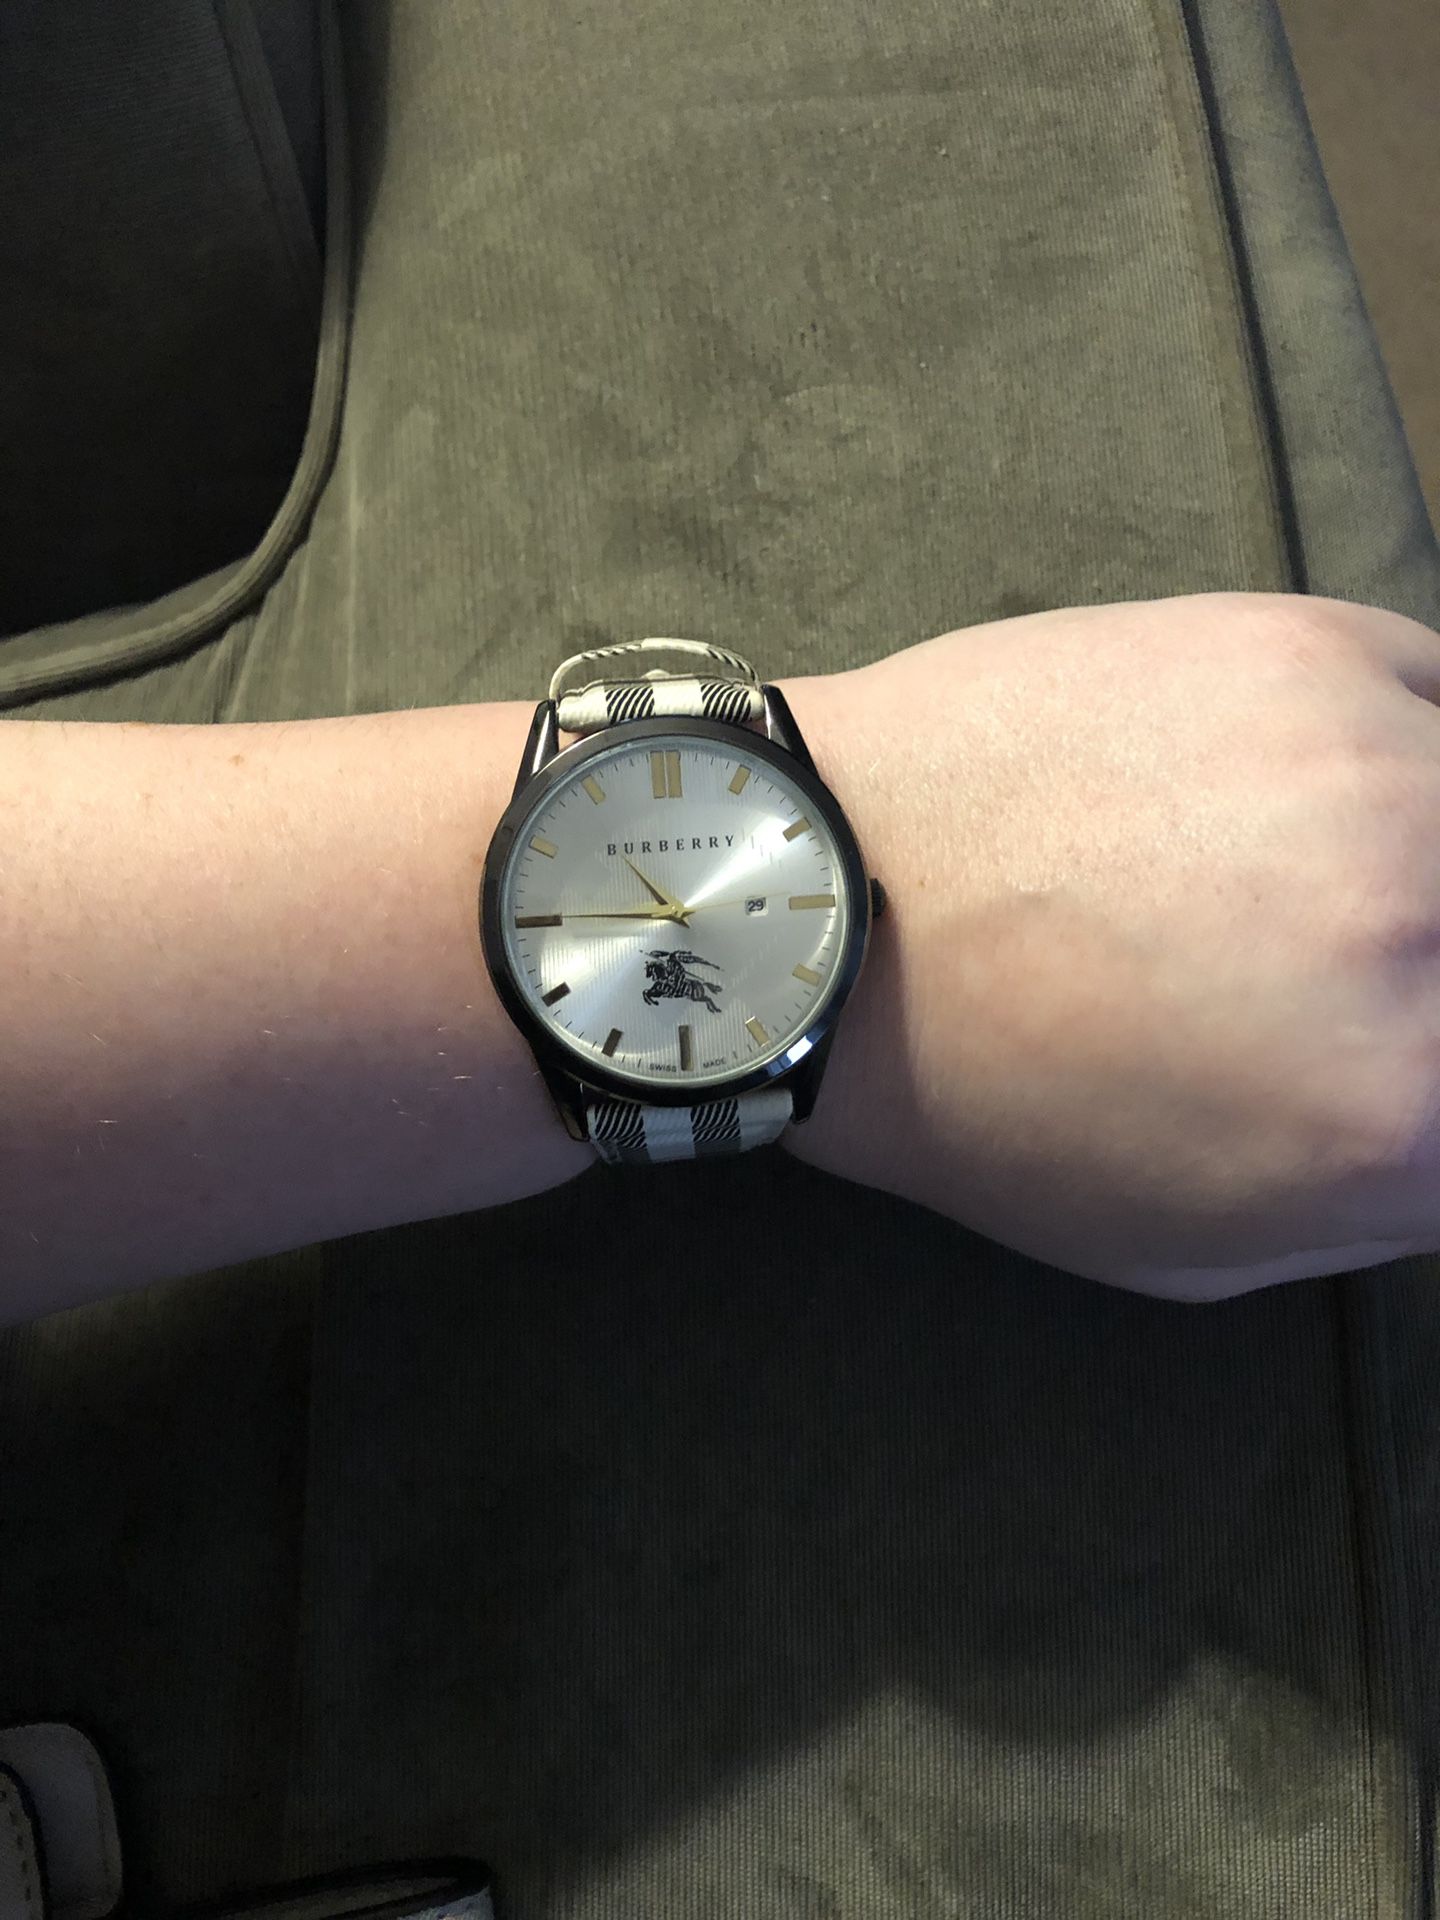 Burberry BU1350 no 14889 leather watch for Sale in Acworth, GA - OfferUp